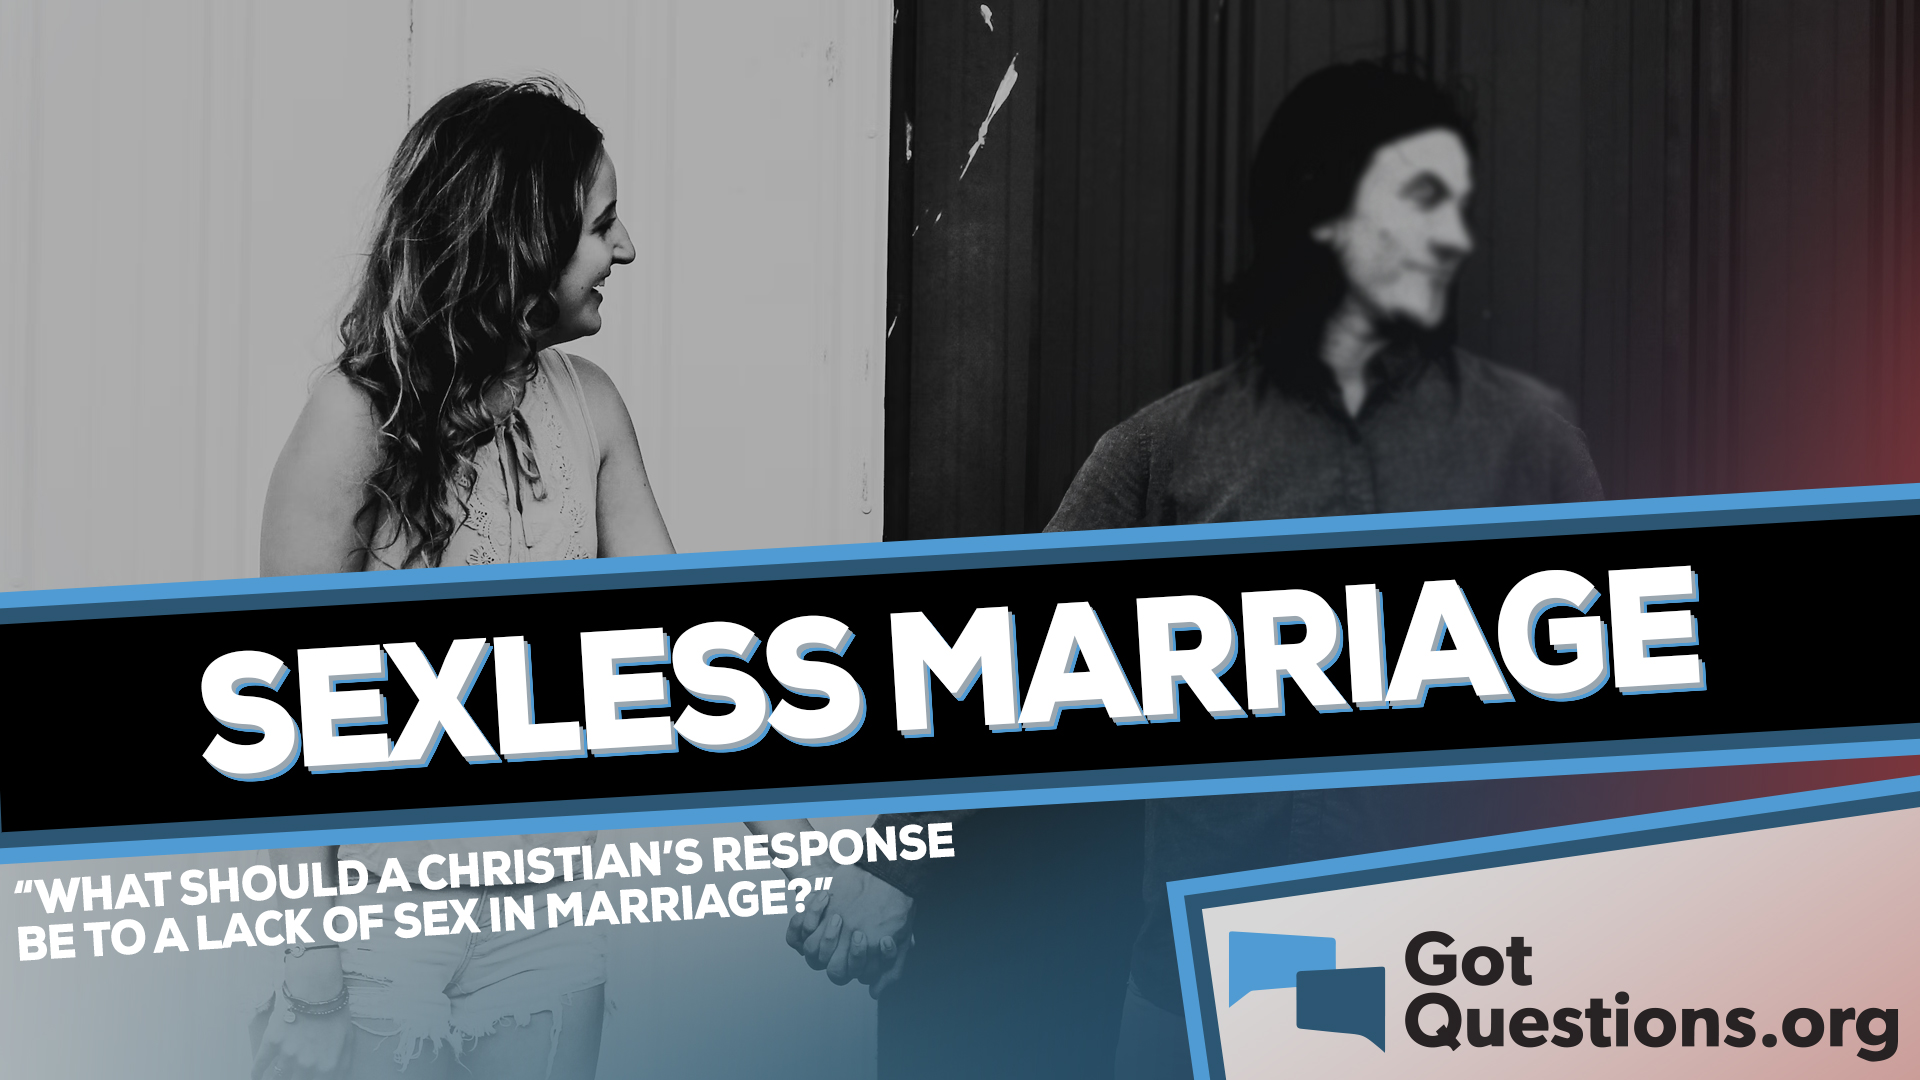 What should be a Christians response to a lack of sex in marriage (a sexless marriage)? GotQuestions image image